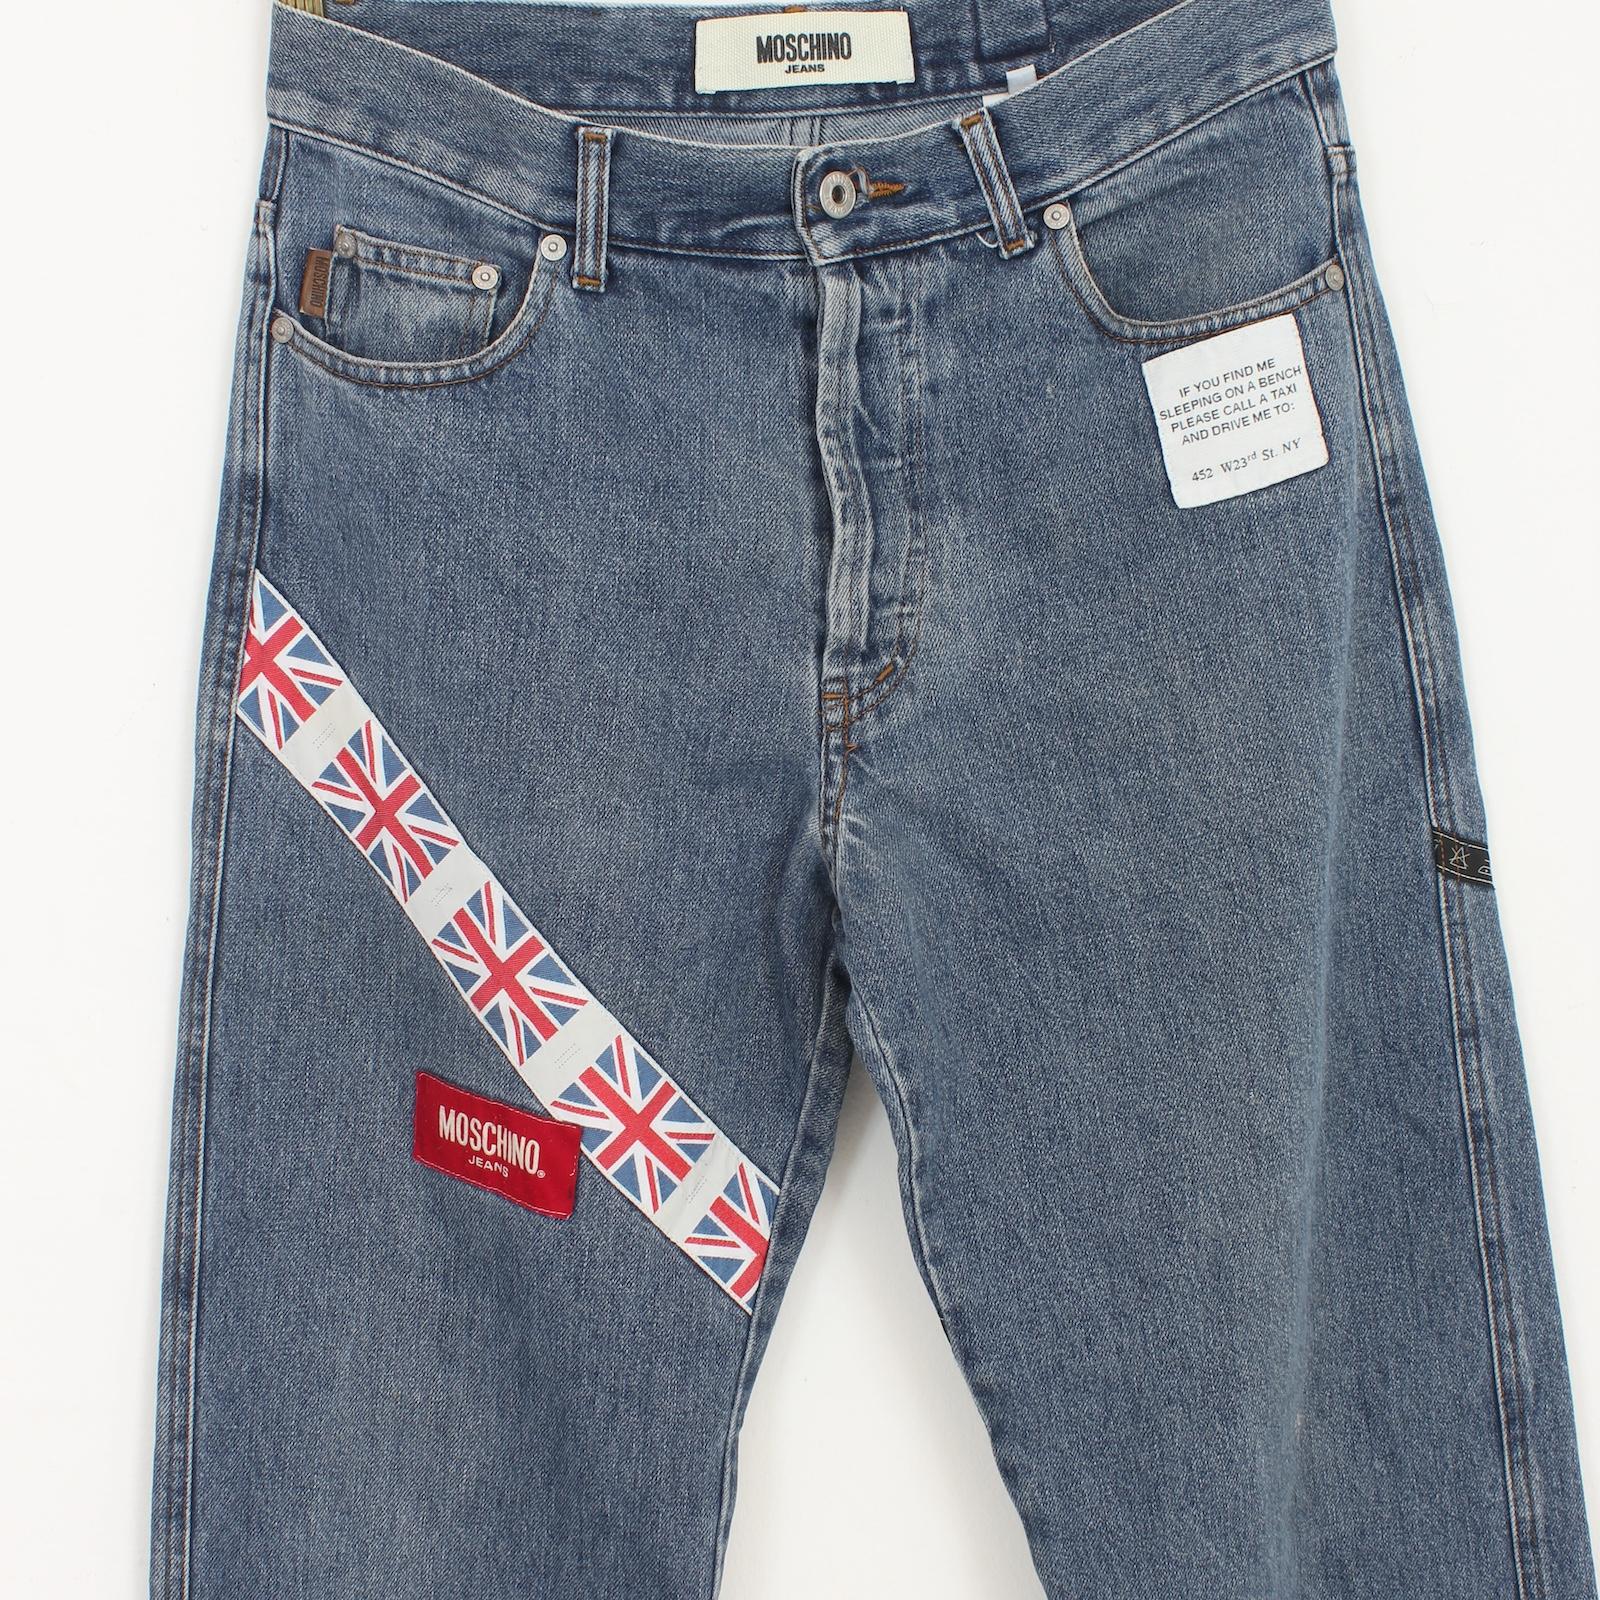 Moschino Patchwork Blue Jeans 2000s For Sale 2